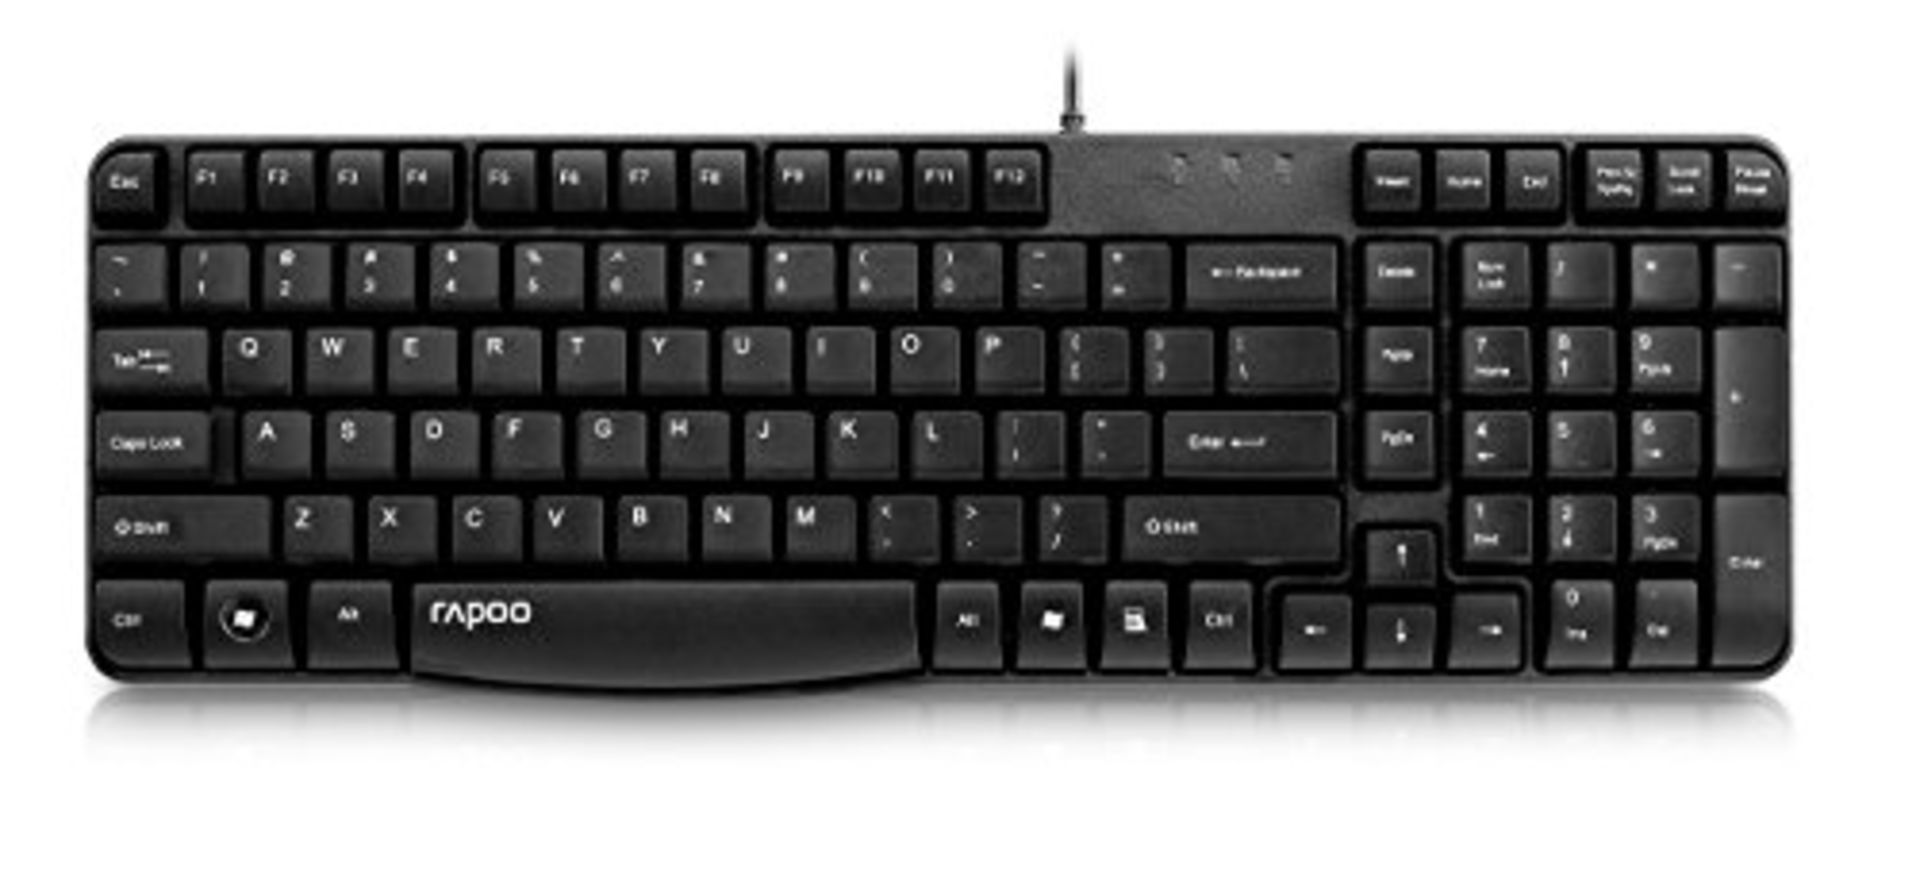 Rapoo N2400 Wired Spill-resistant Keyboard, Black, UK Layout